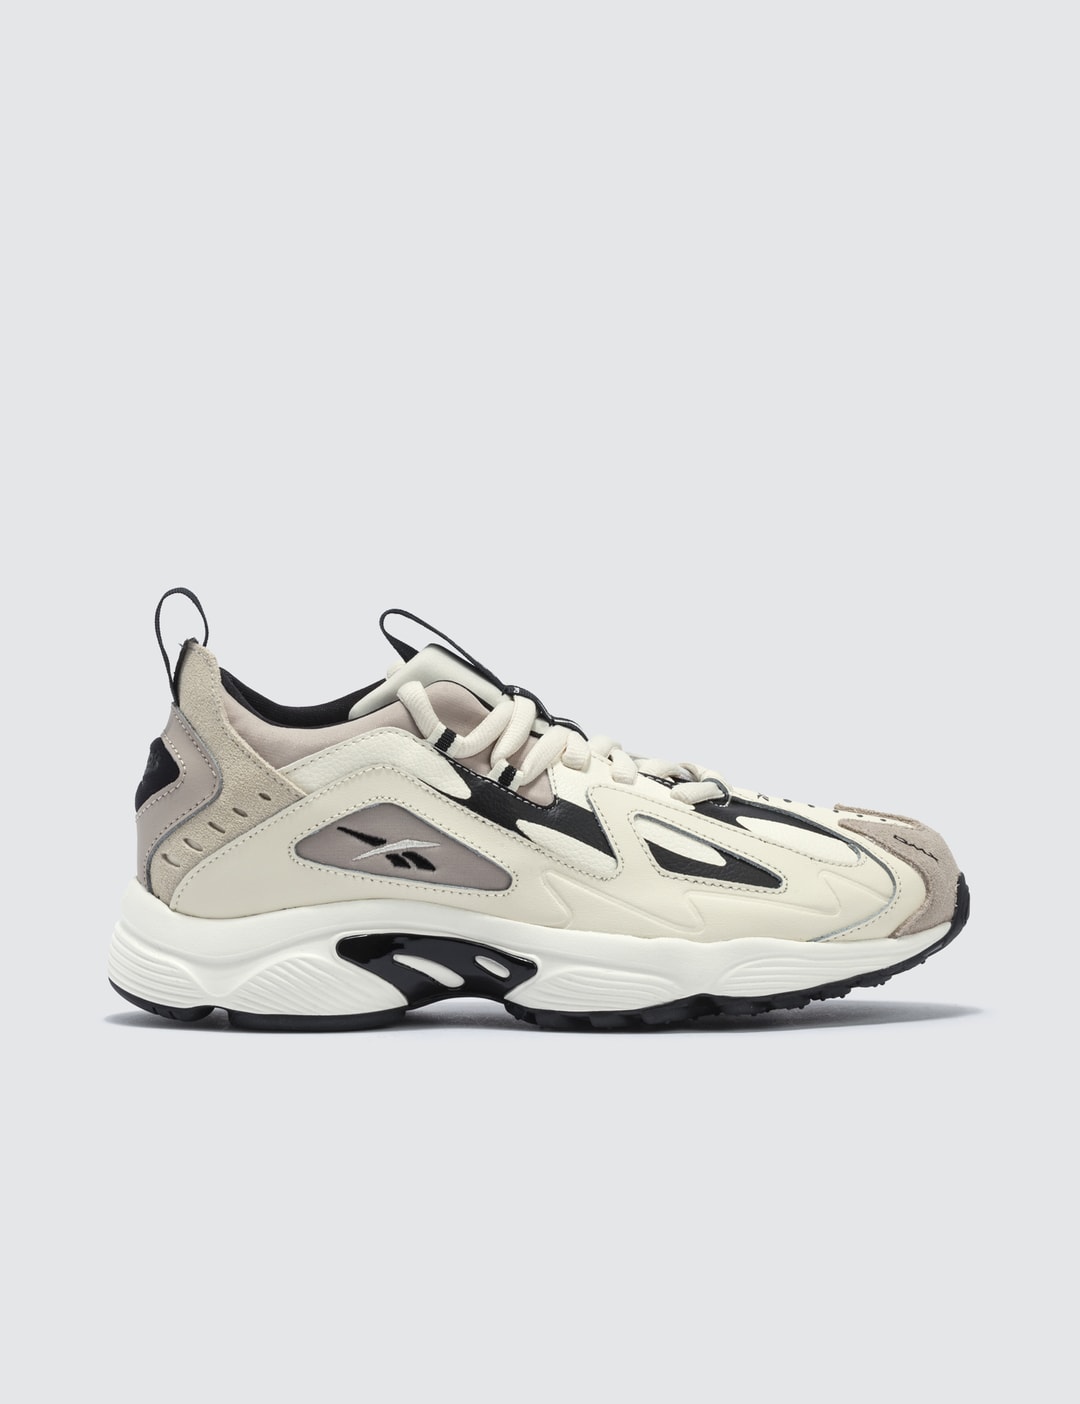 Integrate deadline abdomen Reebok - Reebok x Wanna One Dmx Series 1200 | HBX - Globally Curated  Fashion and Lifestyle by Hypebeast